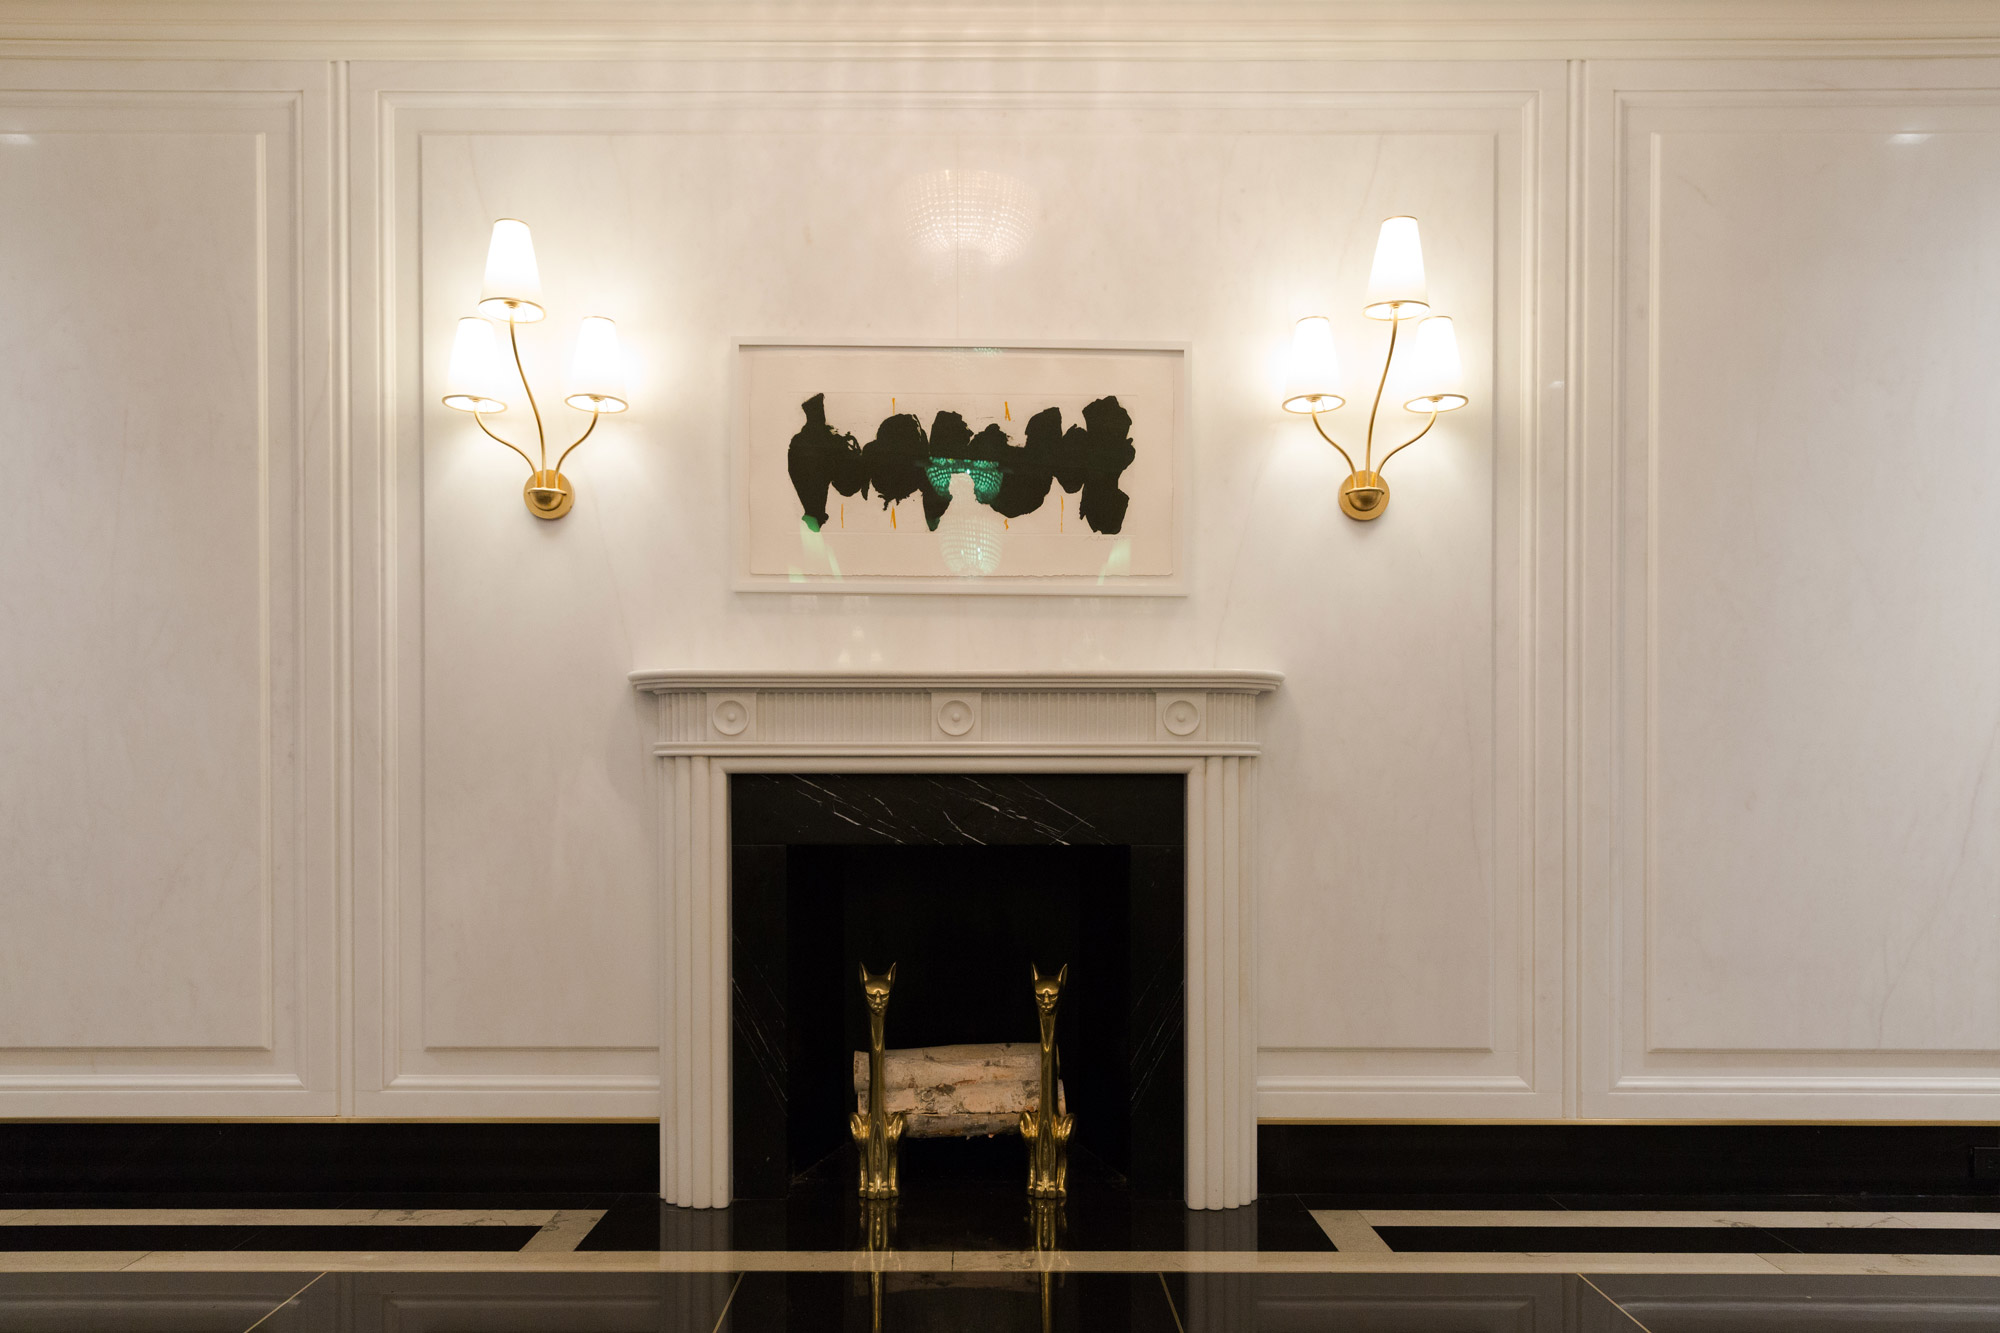 Lobby Renovation in an UES Pre-War Apartment Building - Mantle Artwork Wall